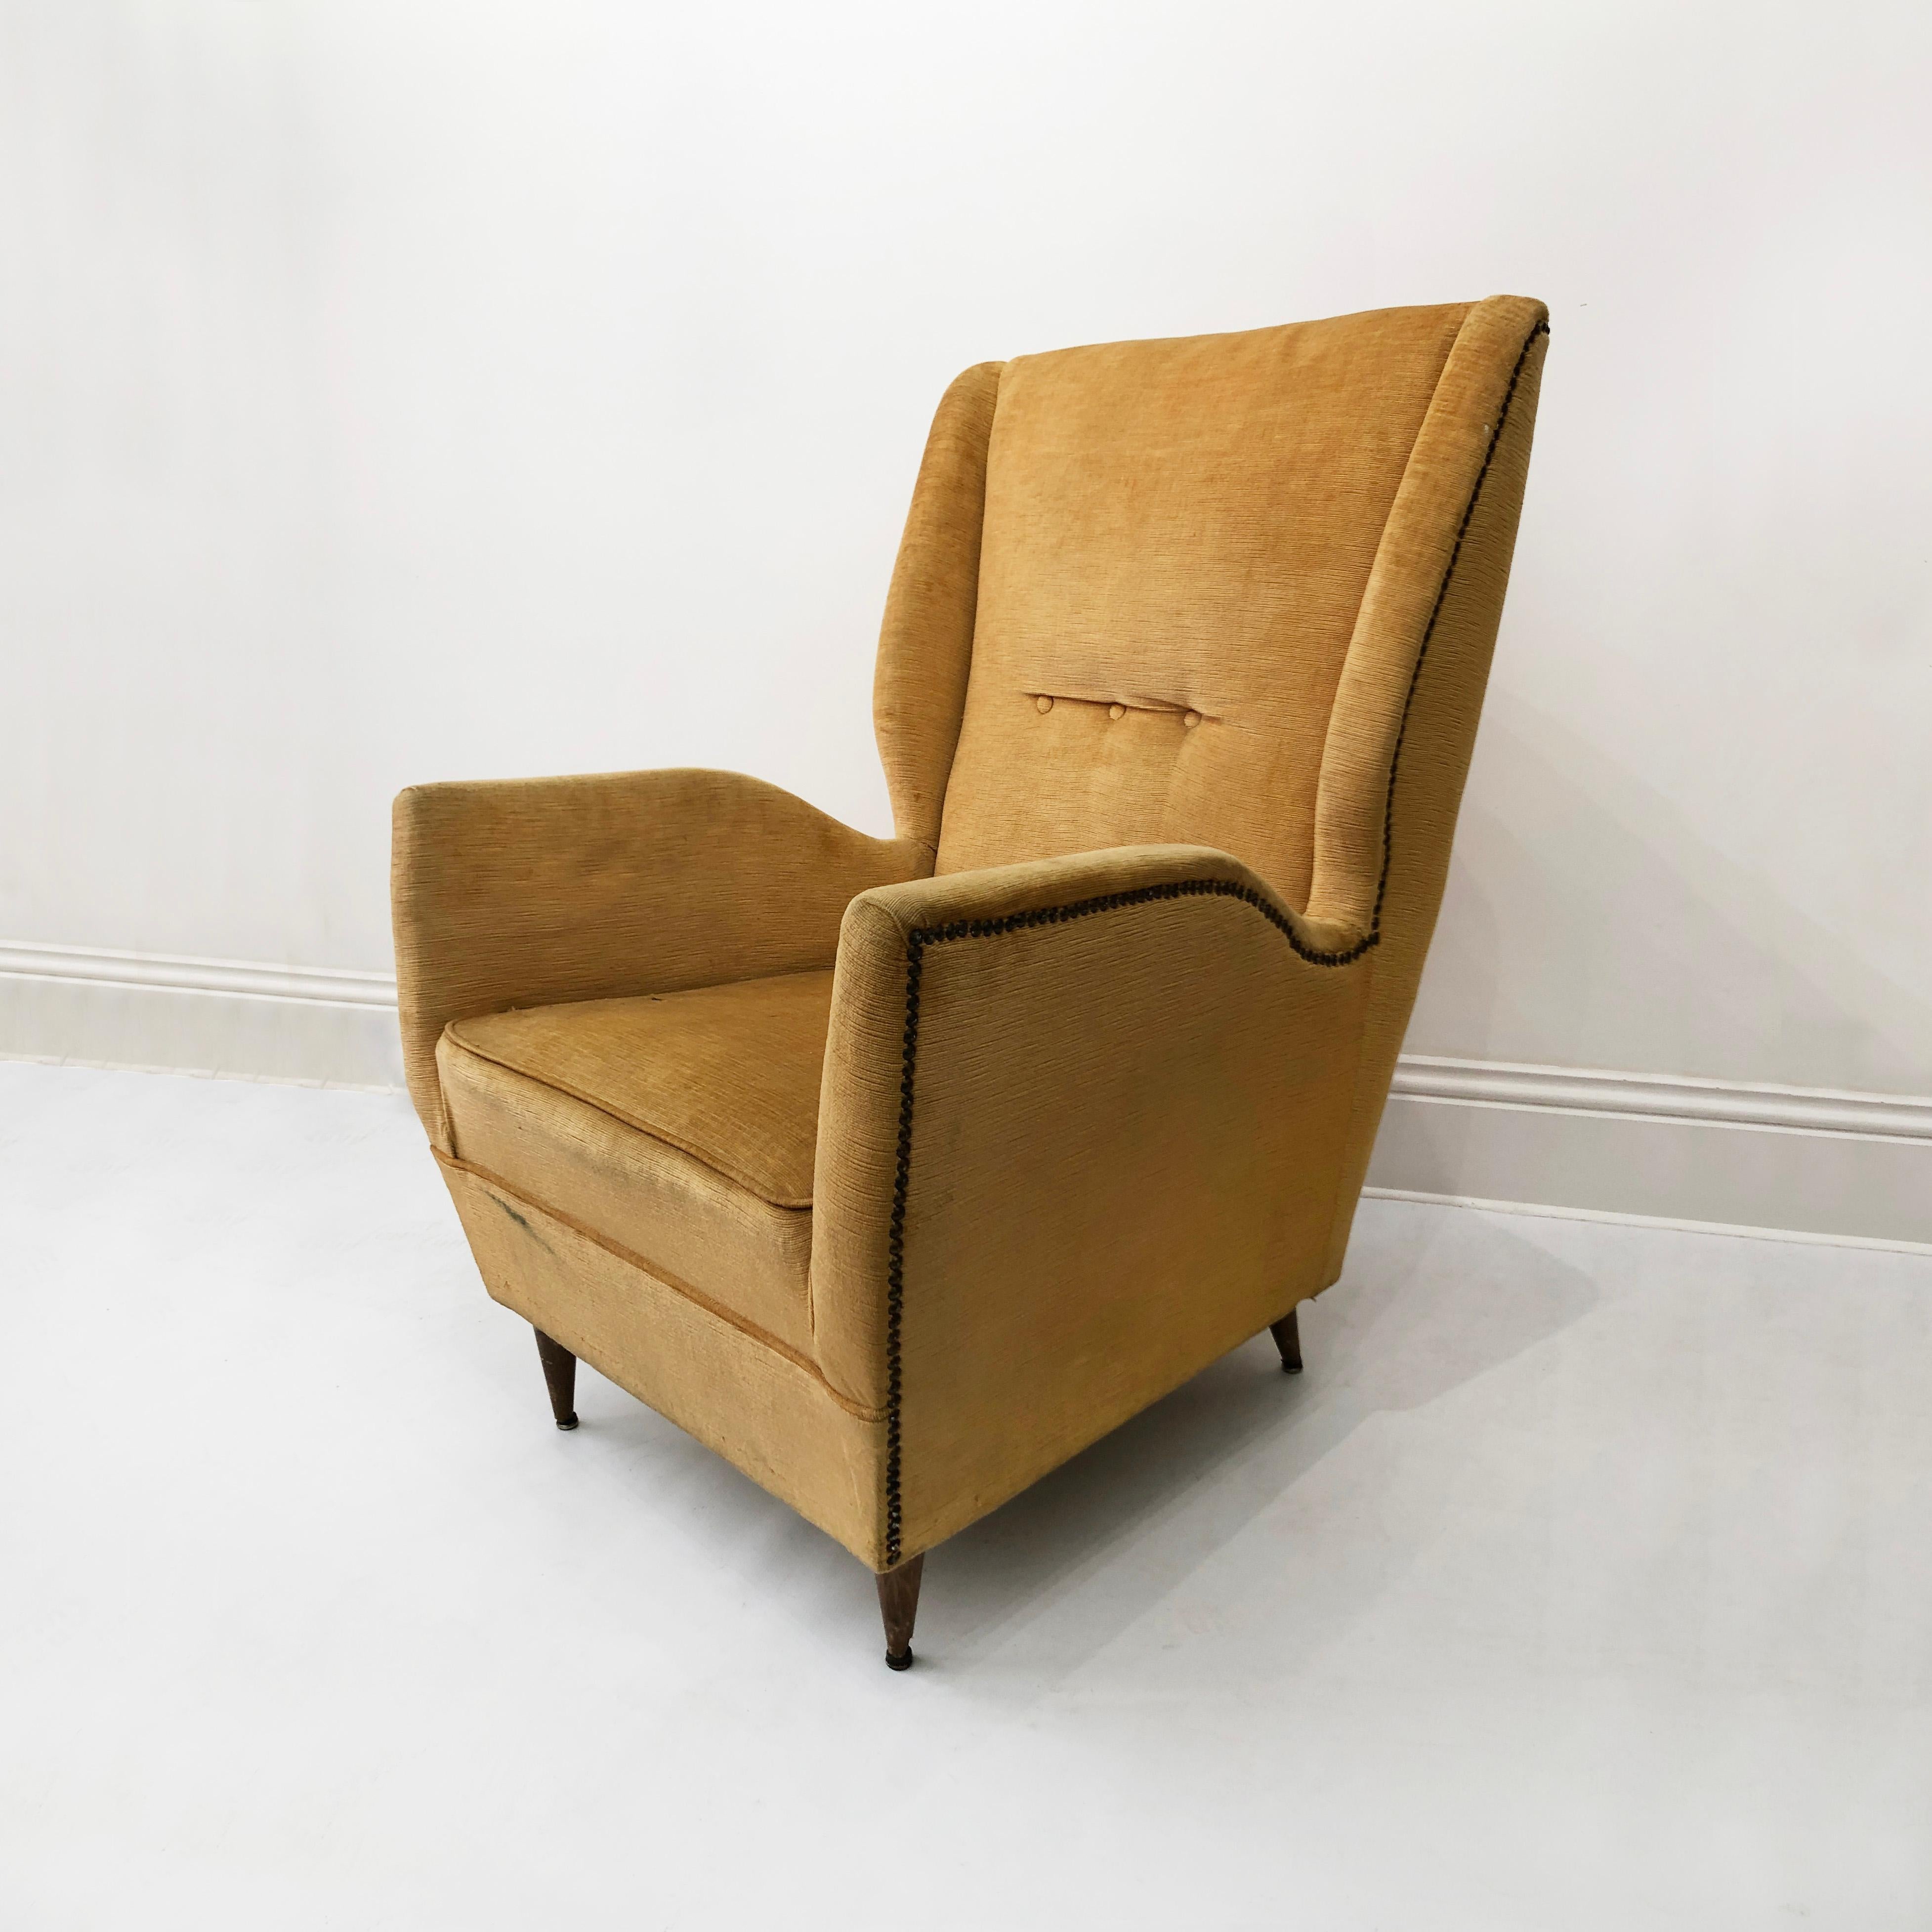 Mid-20th Century Gio Ponti For I.S.A Wingback Armchair, 1950s Midcentury For Sale